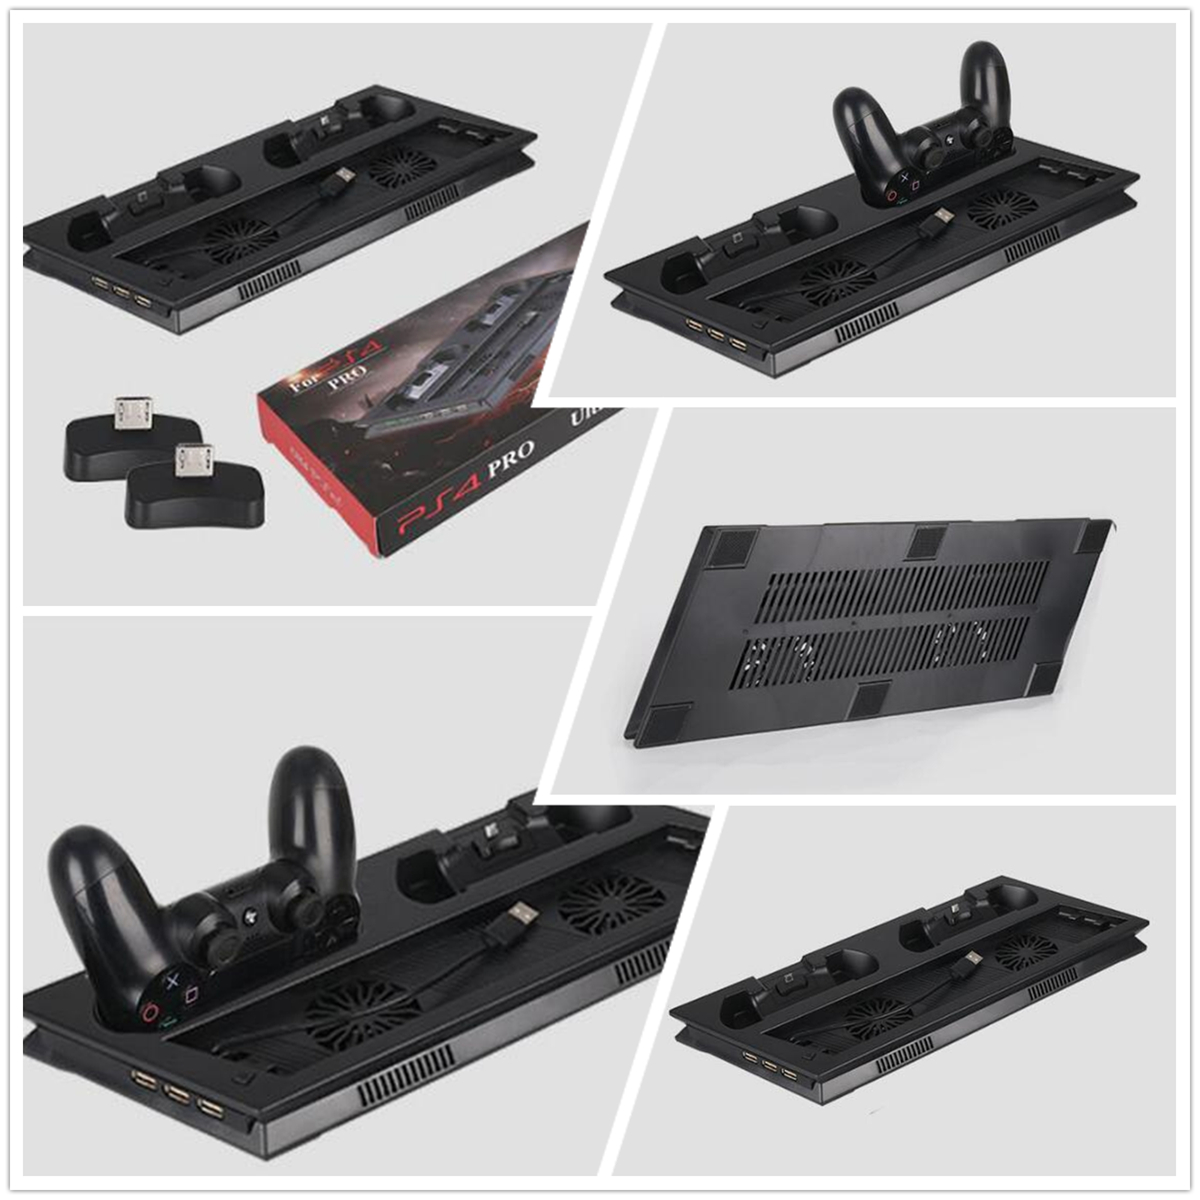 LED Charger Station Stand Charging Dock Cooling Fan for Sony Playstation 4 PS4 PRO Slim Game Console Gamepad 61